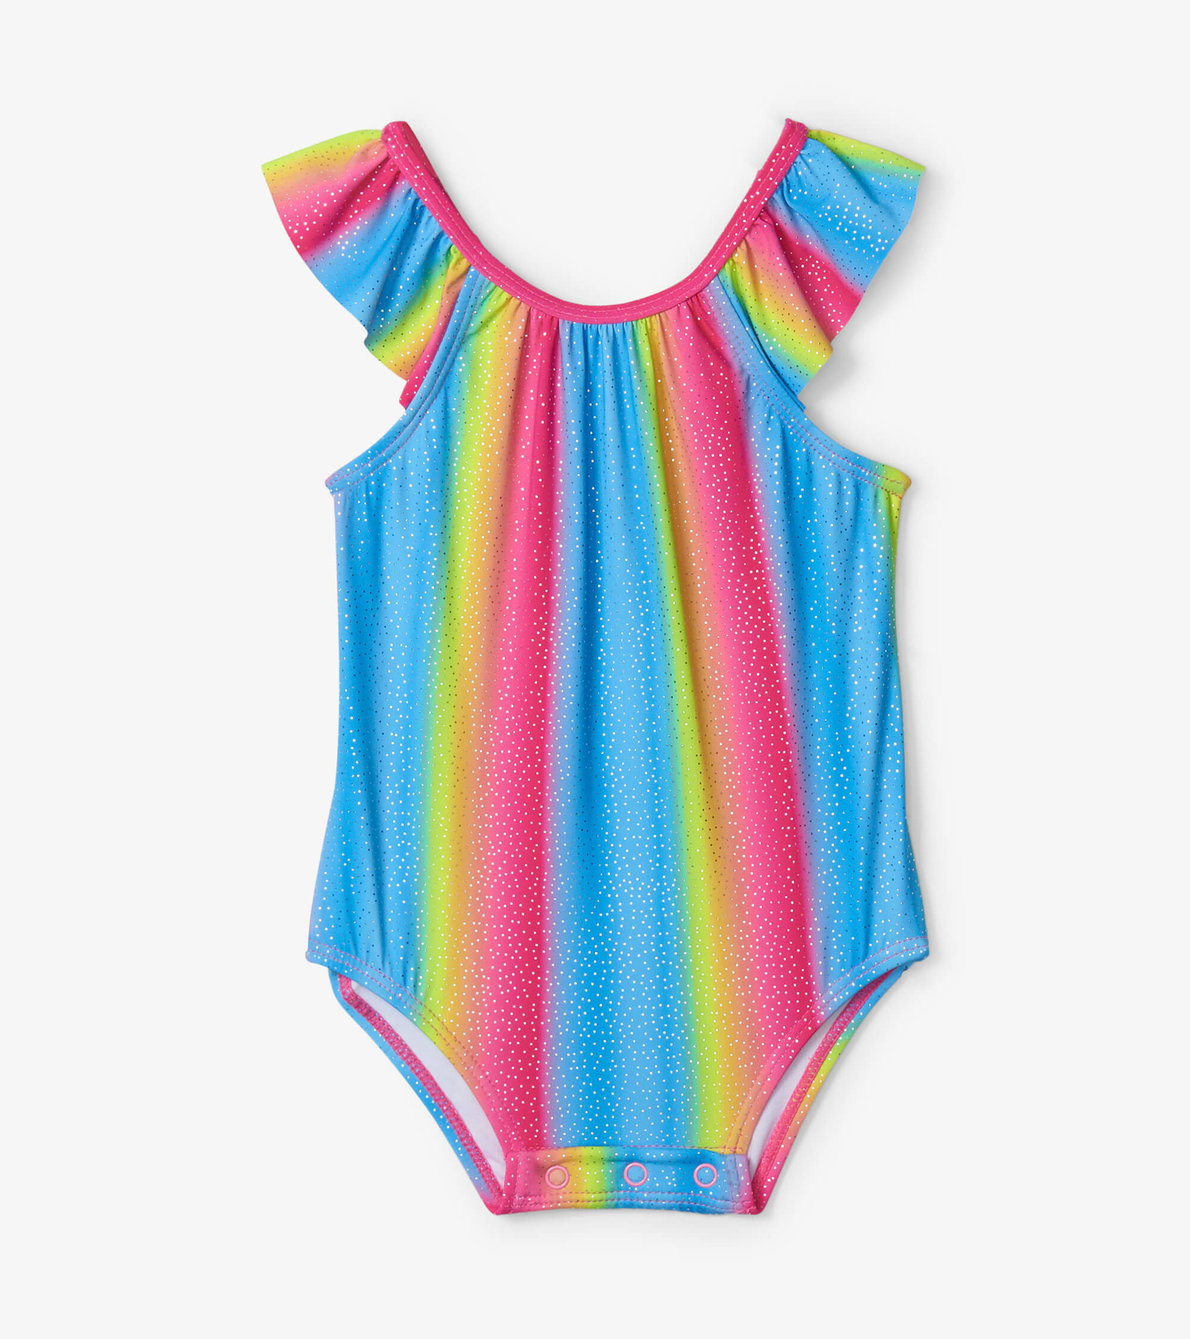 View larger image of Jelly Bean Rainbow Baby Ruffle Swimsuit